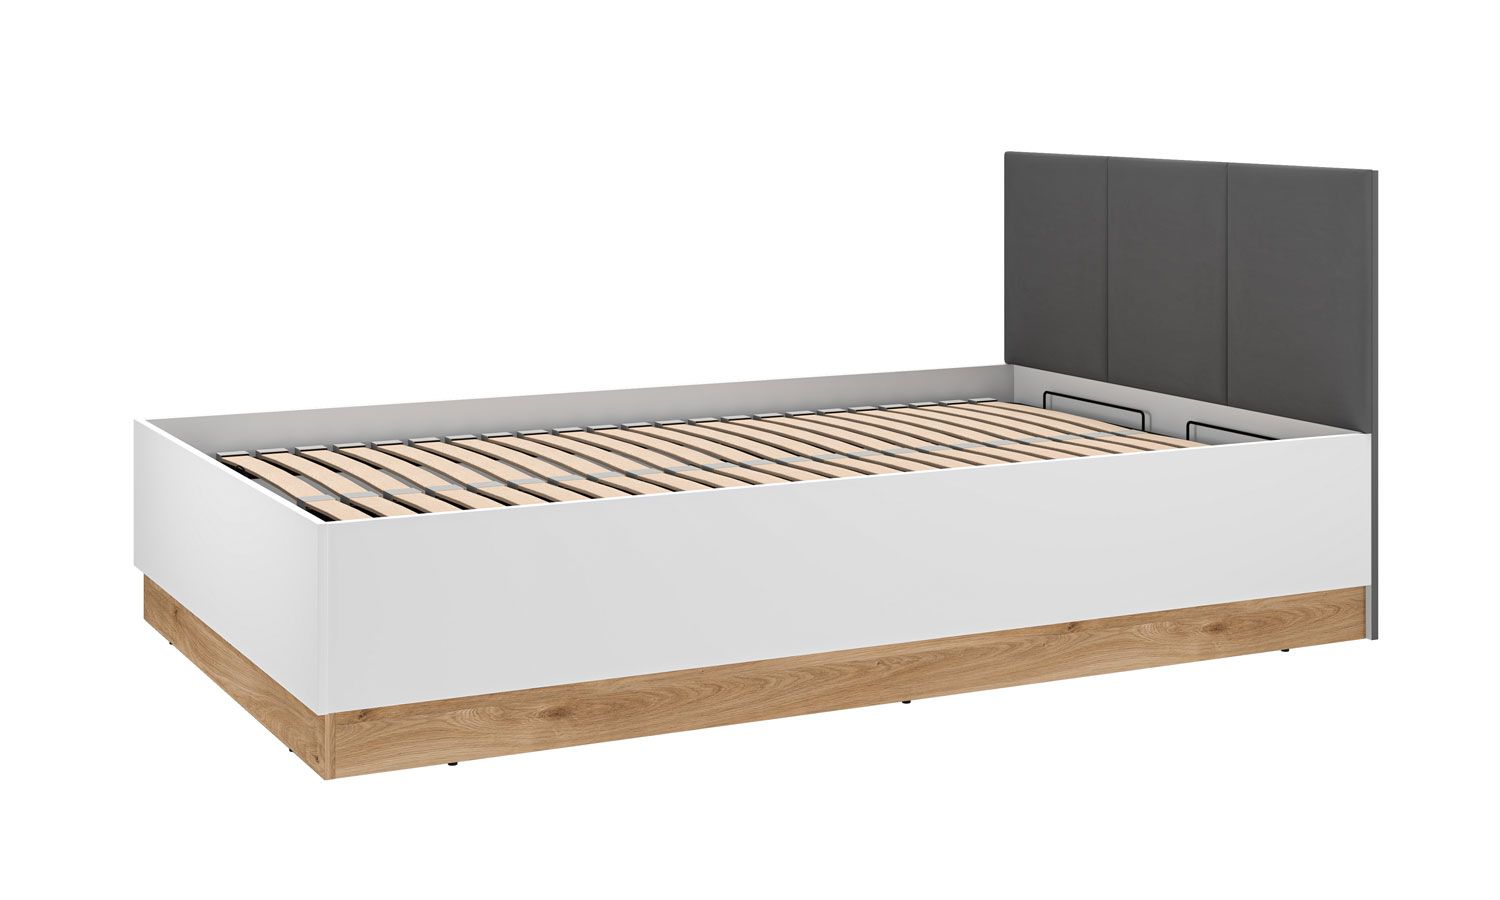 Single bed / guest bed incl. lift-up slatted frame Mackinac 12, color: white / oak / graphite matt, ABS edge protection, lying surface: 120 x 200 cm 